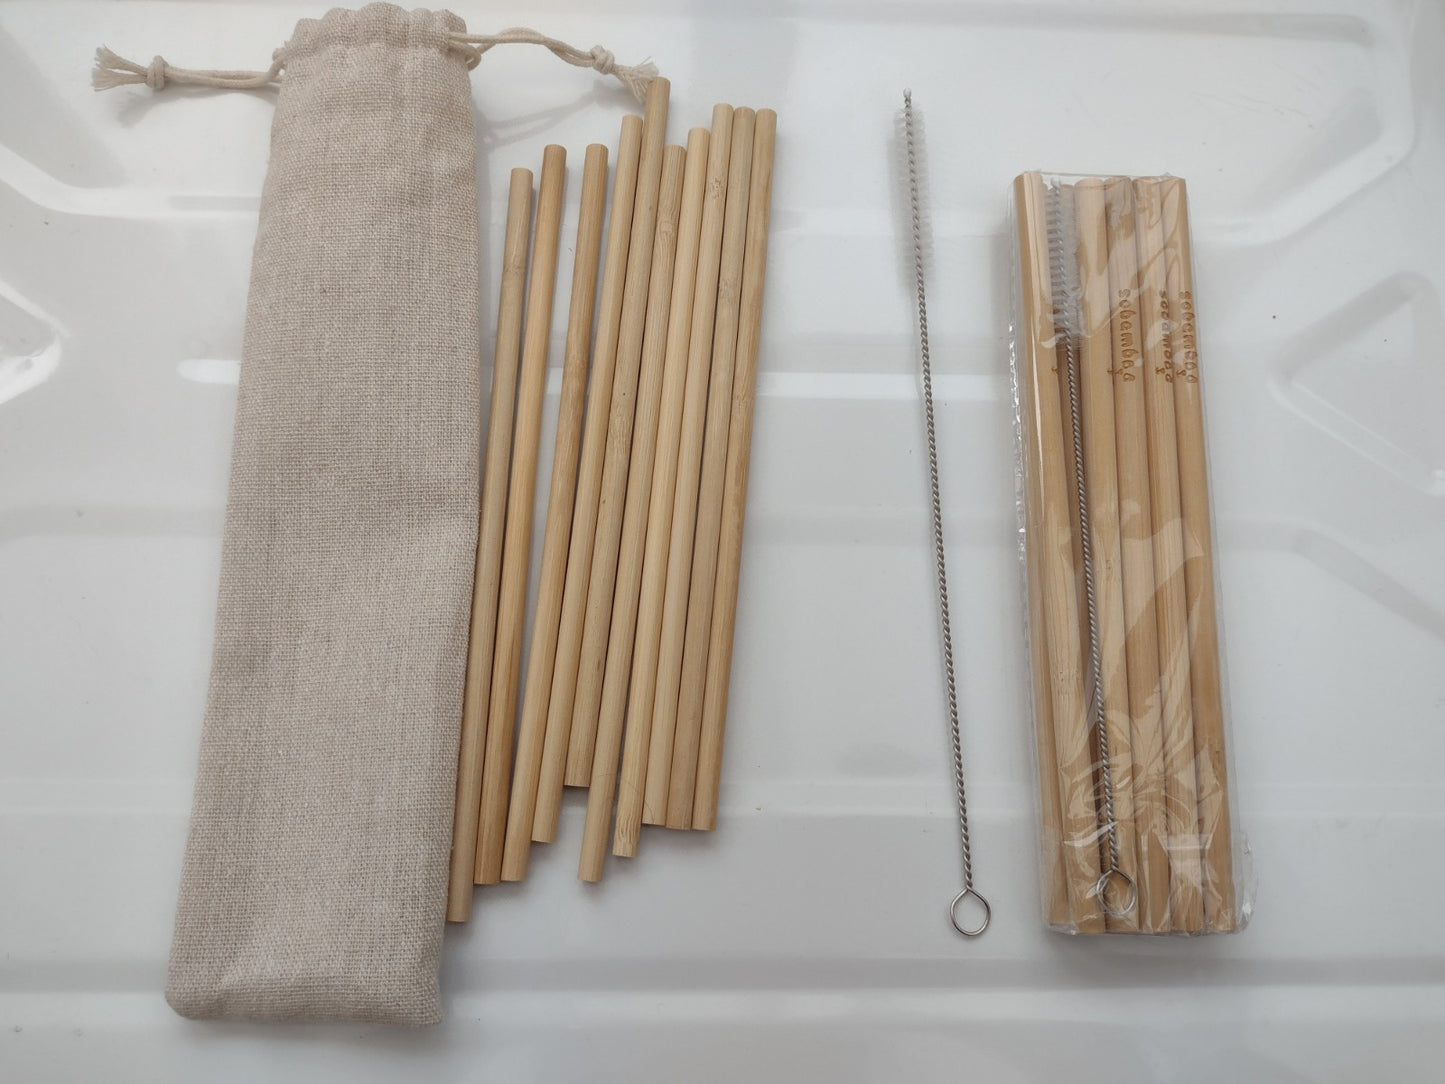 20 Bamboo Drinking Straws Set with Carry Bag & Cleaning Brush